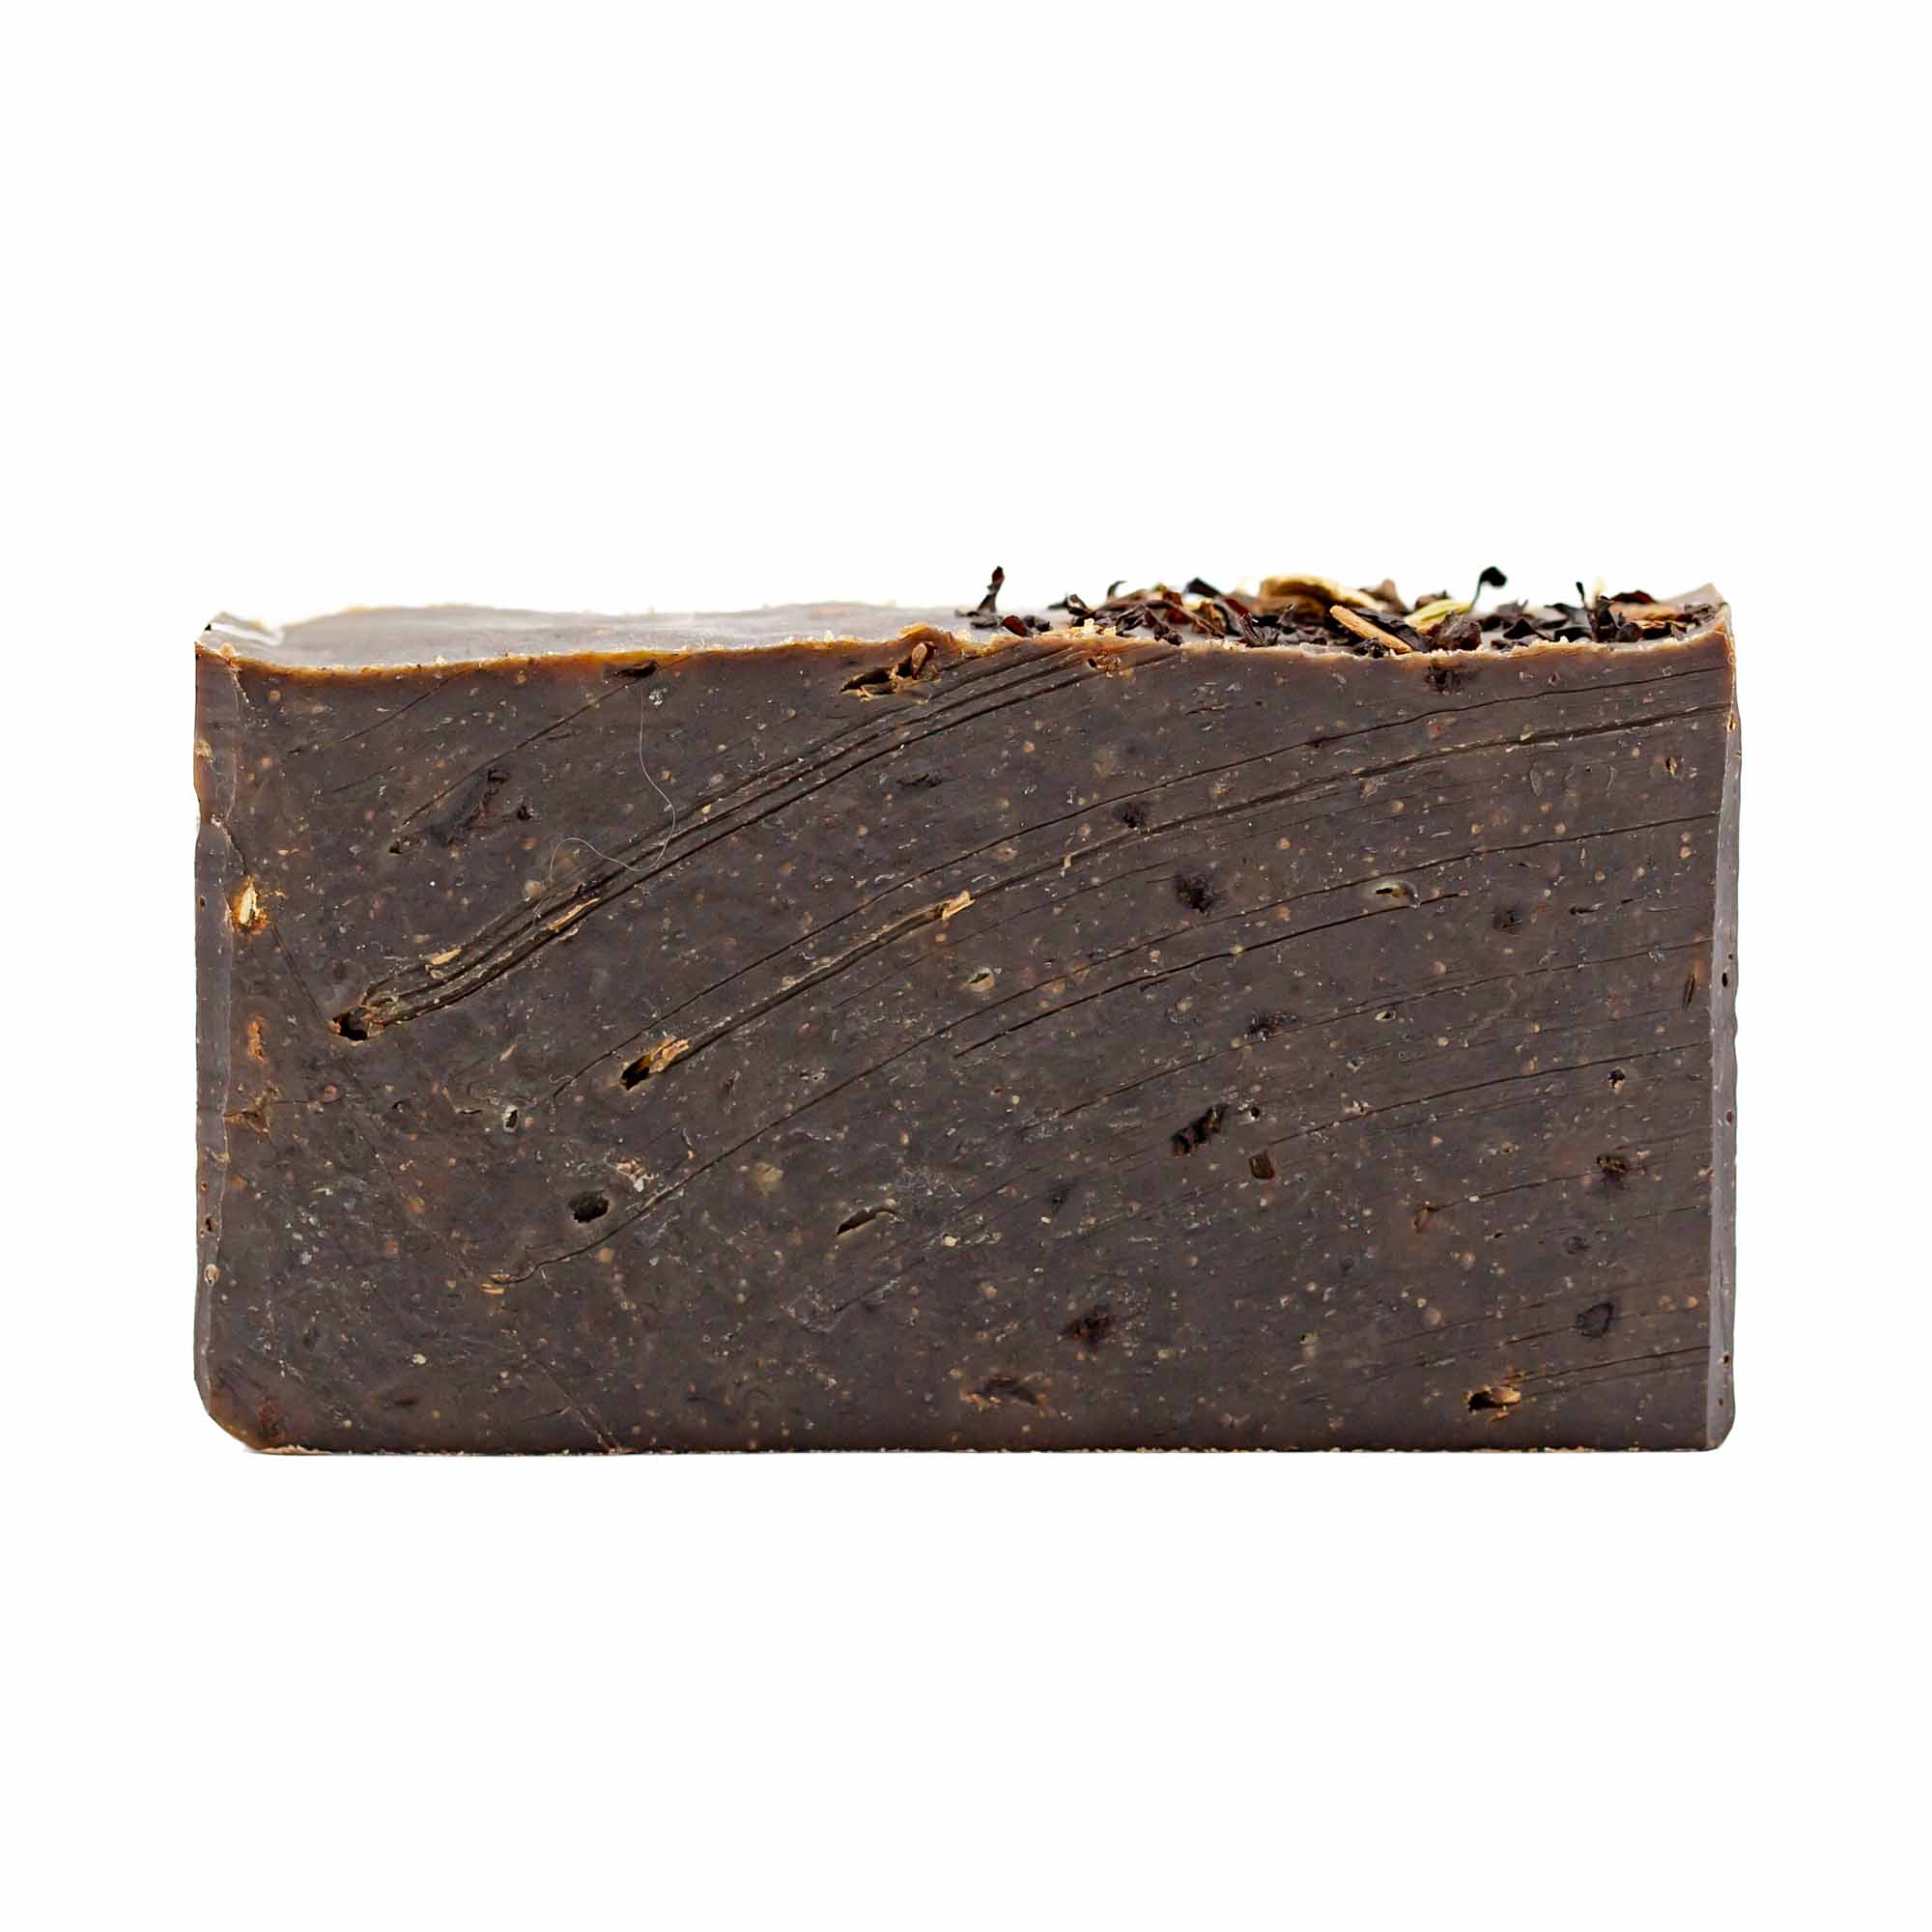 welliver goods - spiced chai bar soap - Mortise And Tenon